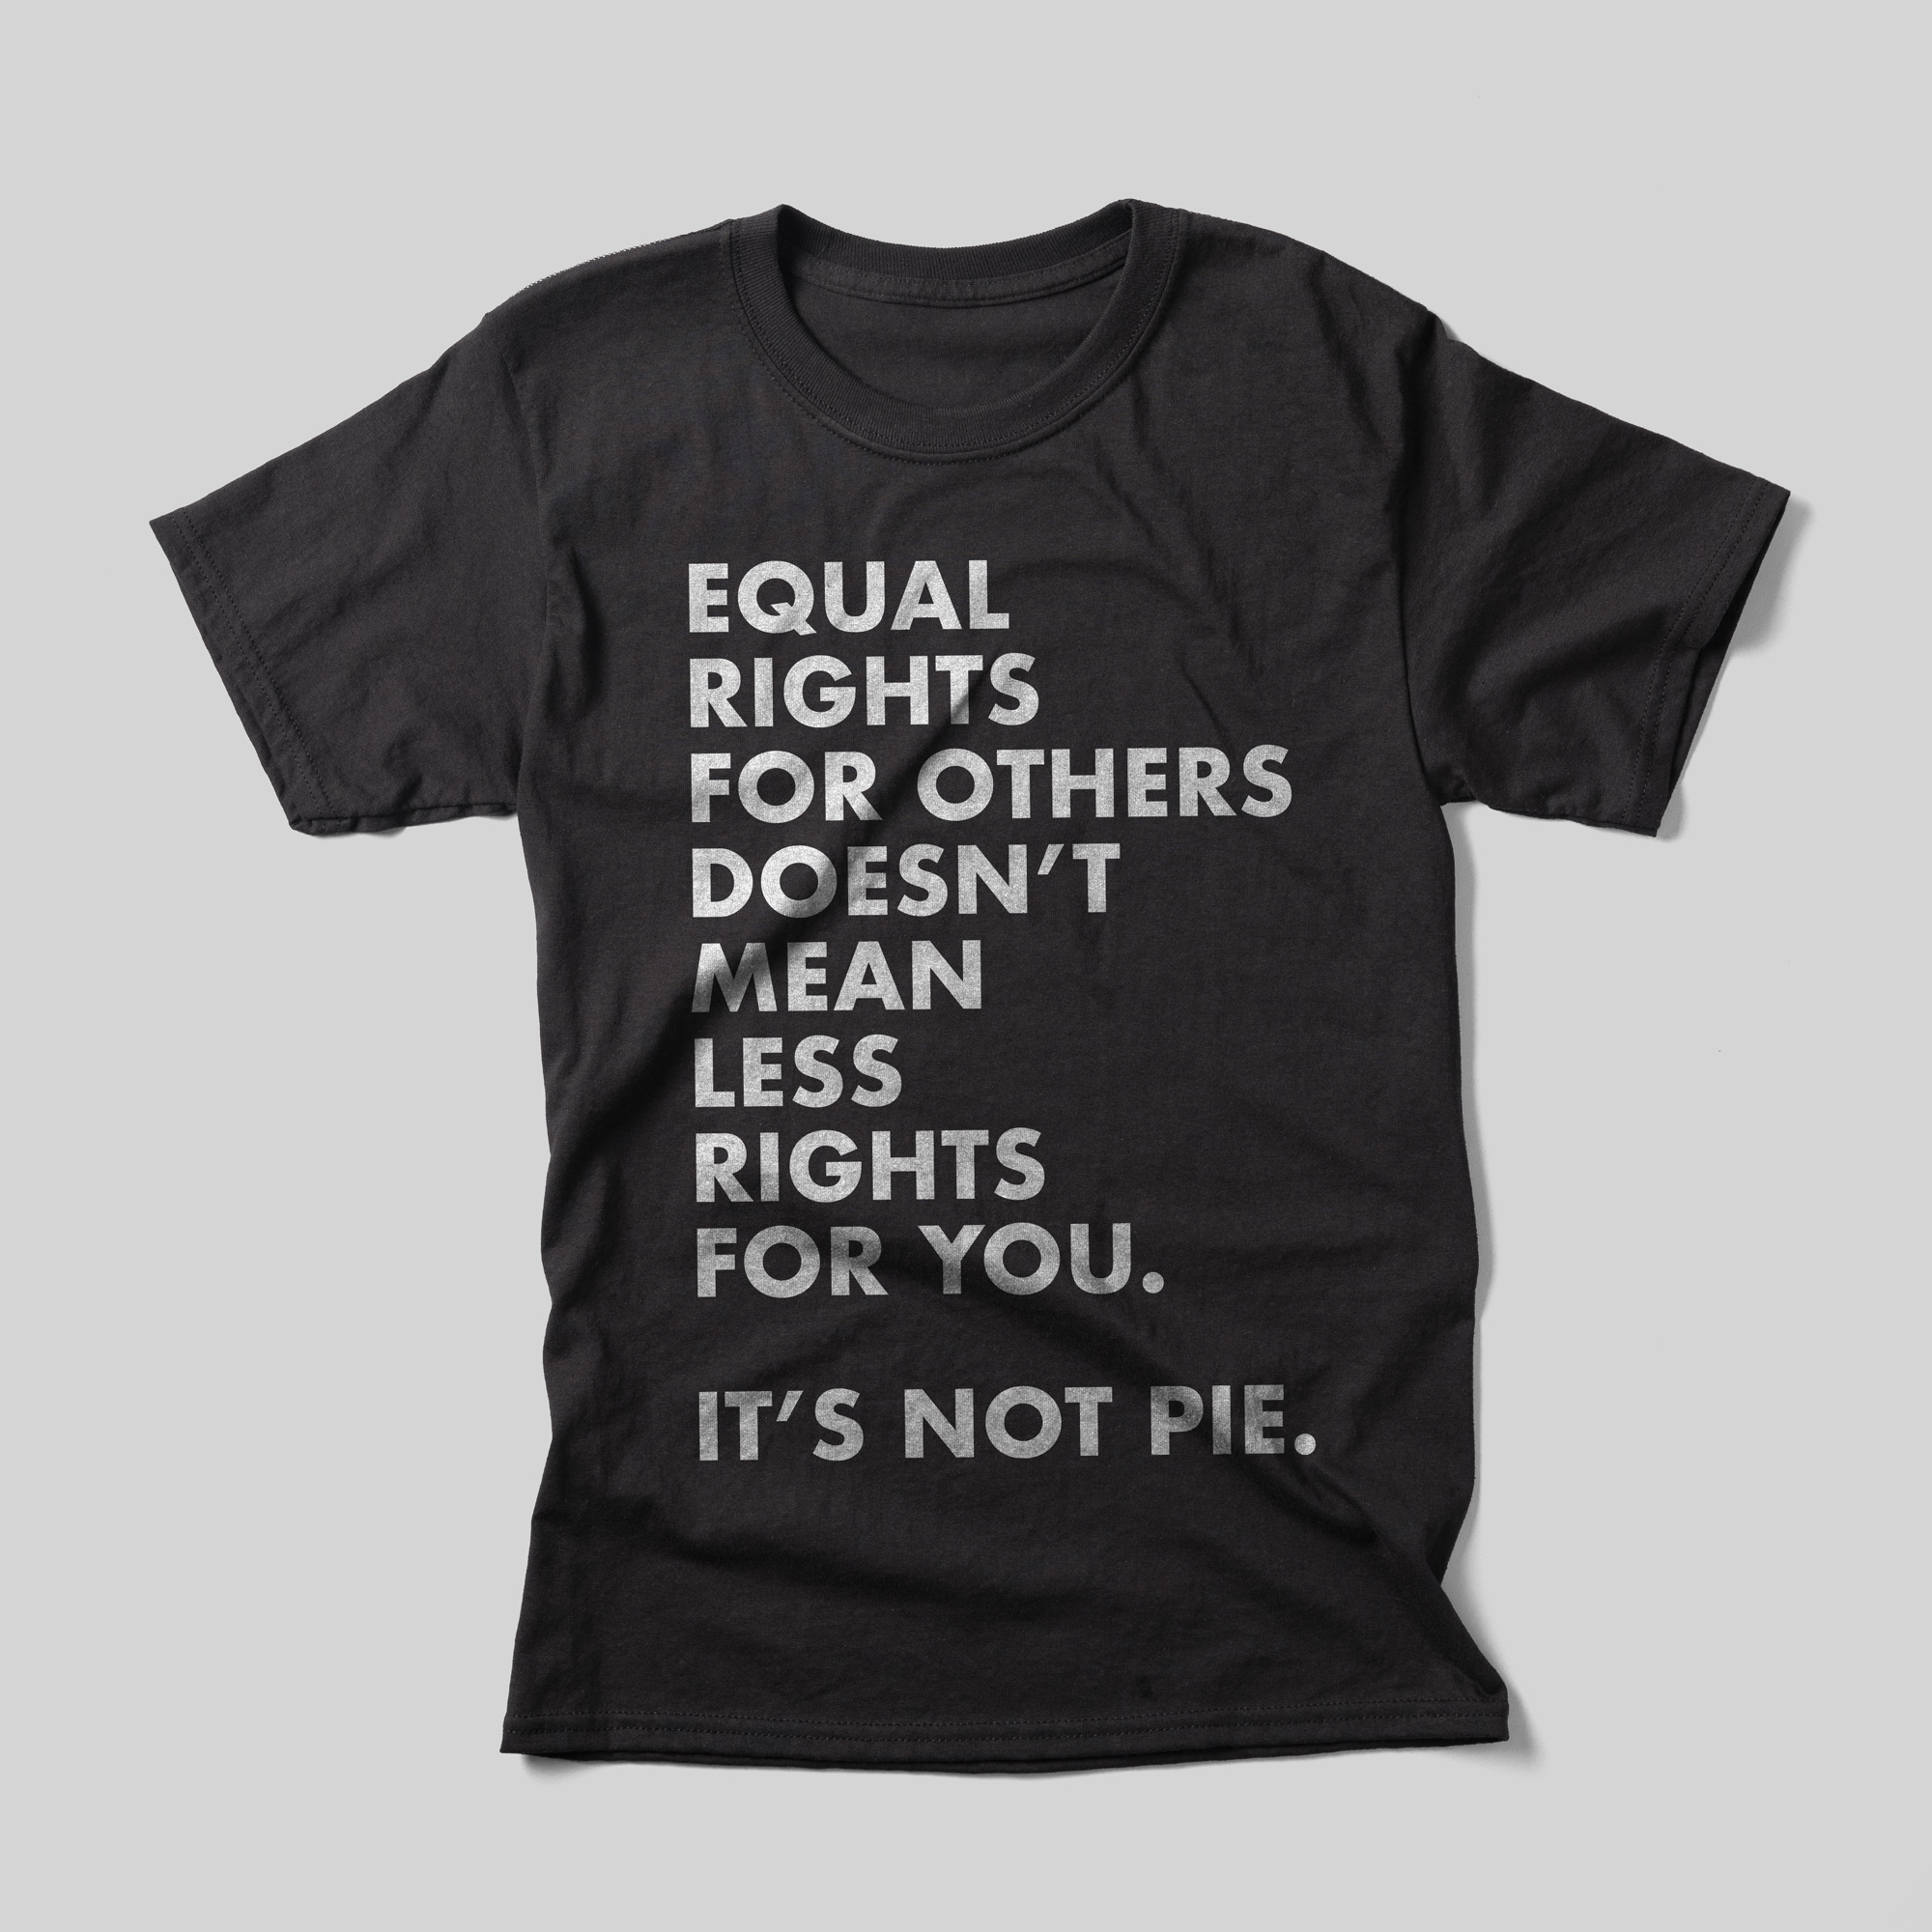 A black t-shirt that reads Equal rights for others doesn't mean less rights for you. It's not pie in gray text.